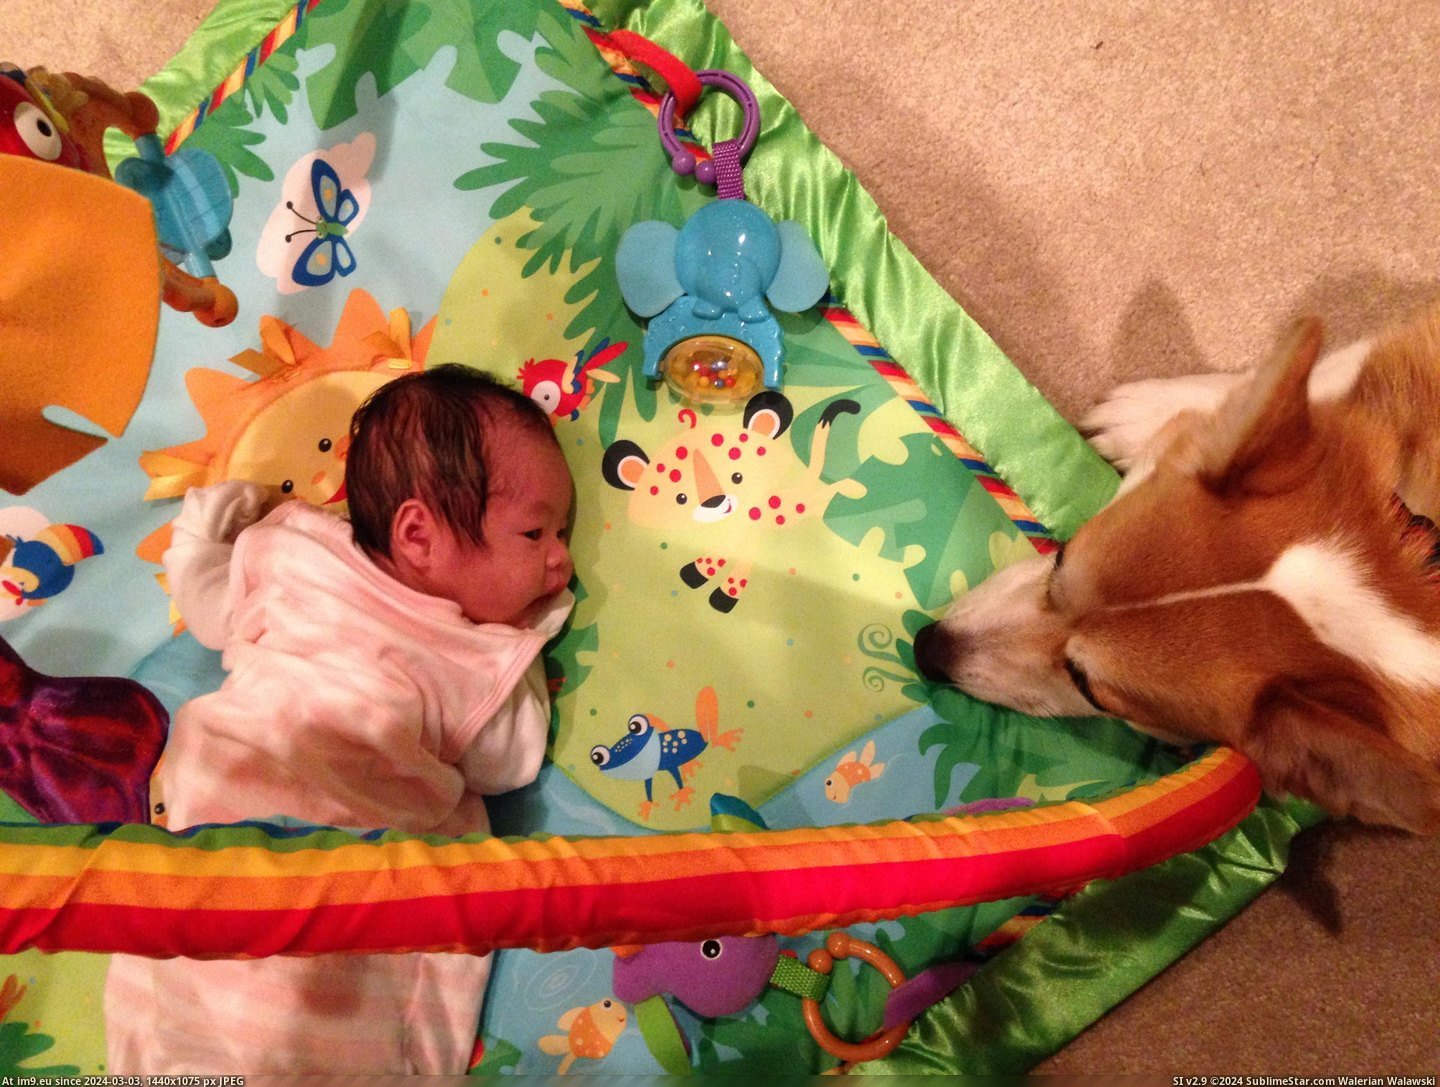 #Was #New #Ago #But #How #Daughter #Weeks #Born [Aww] My daughter was born three weeks ago. I worried about how my corgi would react but he's treating her like his new BFF... 2 Pic. (Bild von album My r/AWW favs))